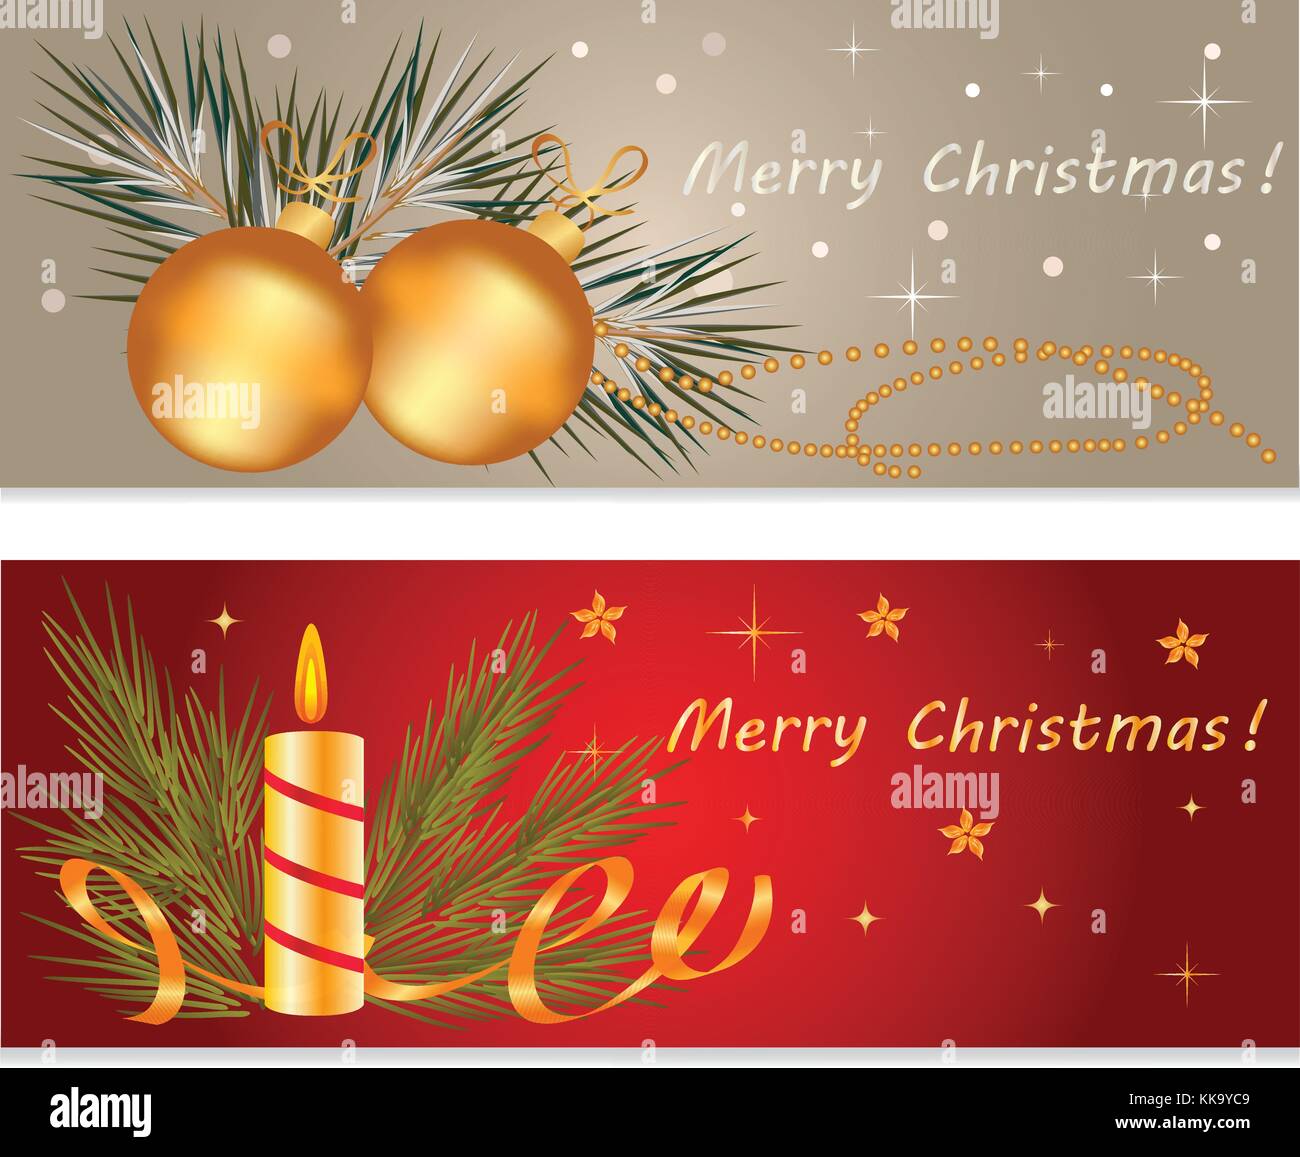 Christmas banner set with holiday elements Stock Vector